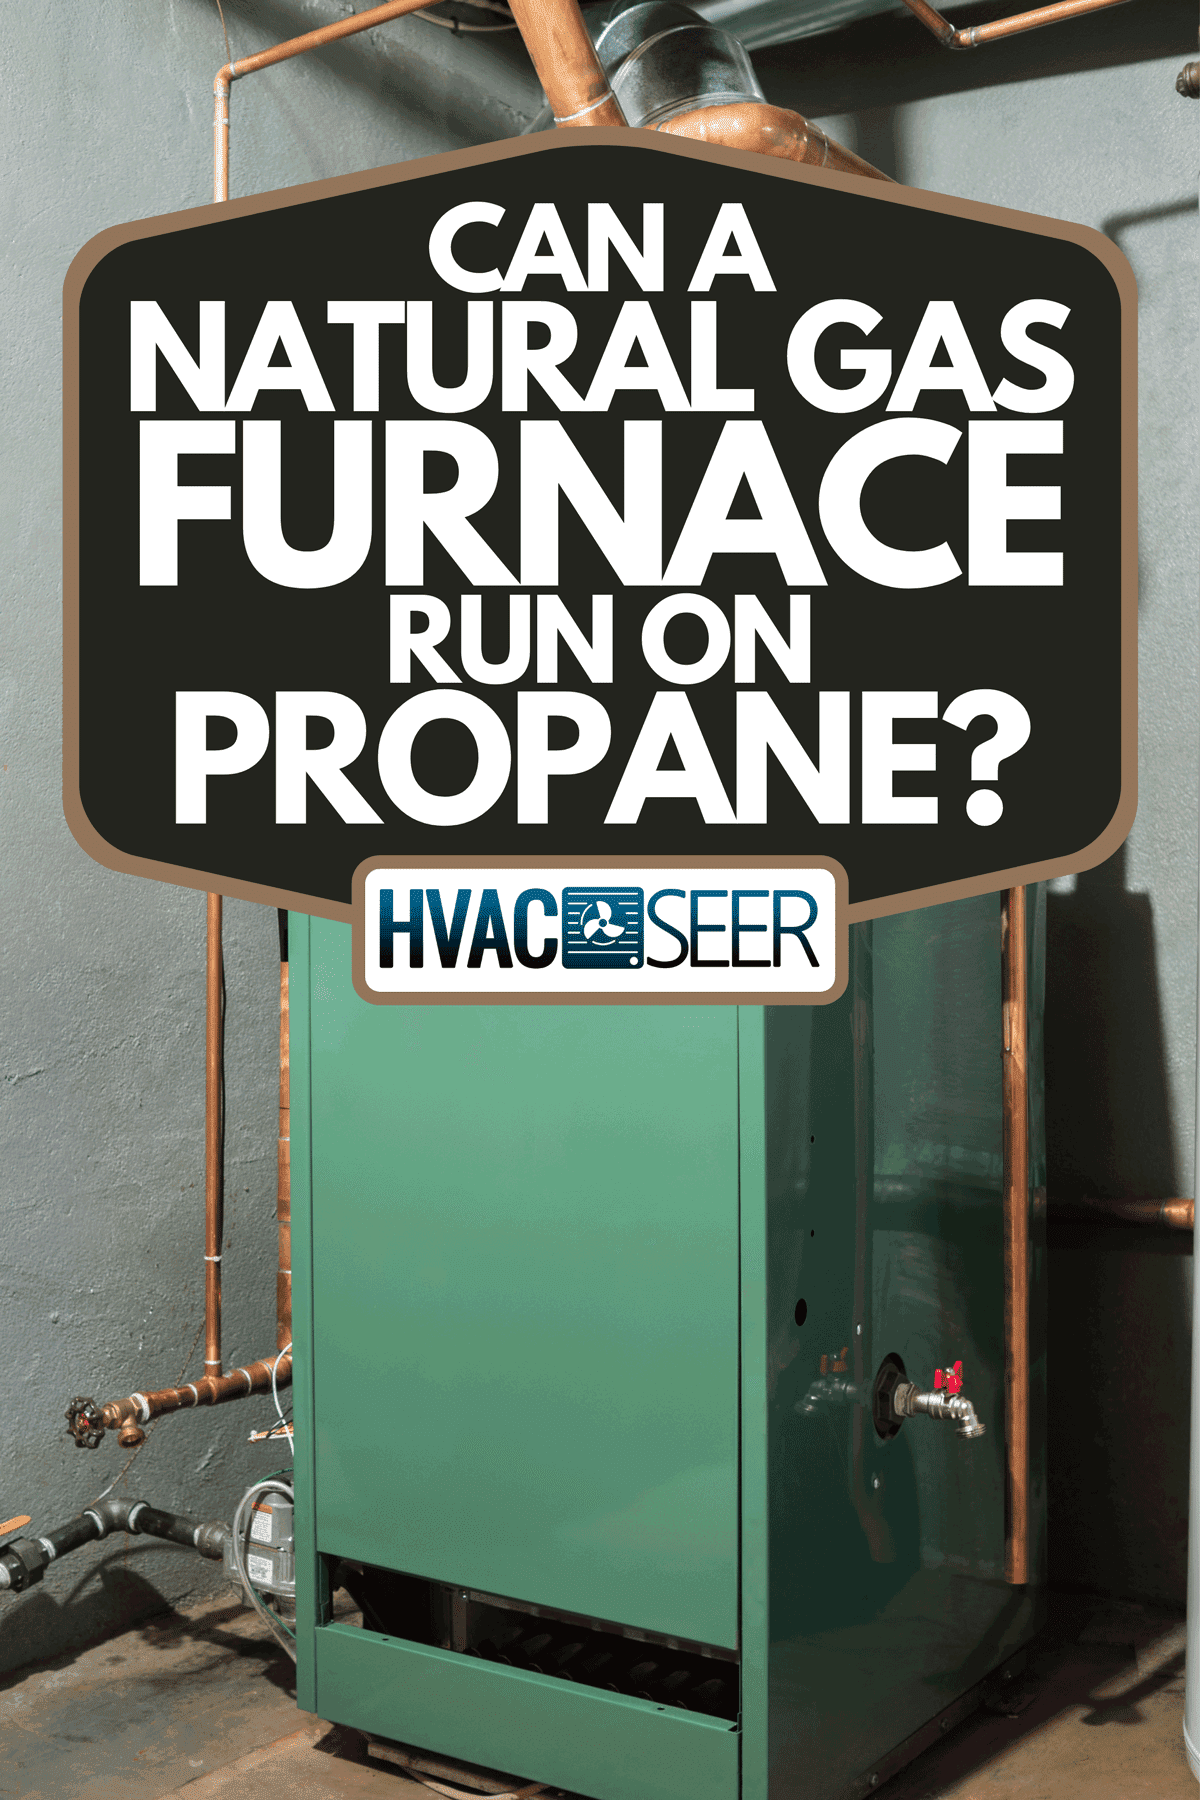 A new steam heat furnace fueled with natural gas, Can A Natural Gas Furnace Run On Propane?